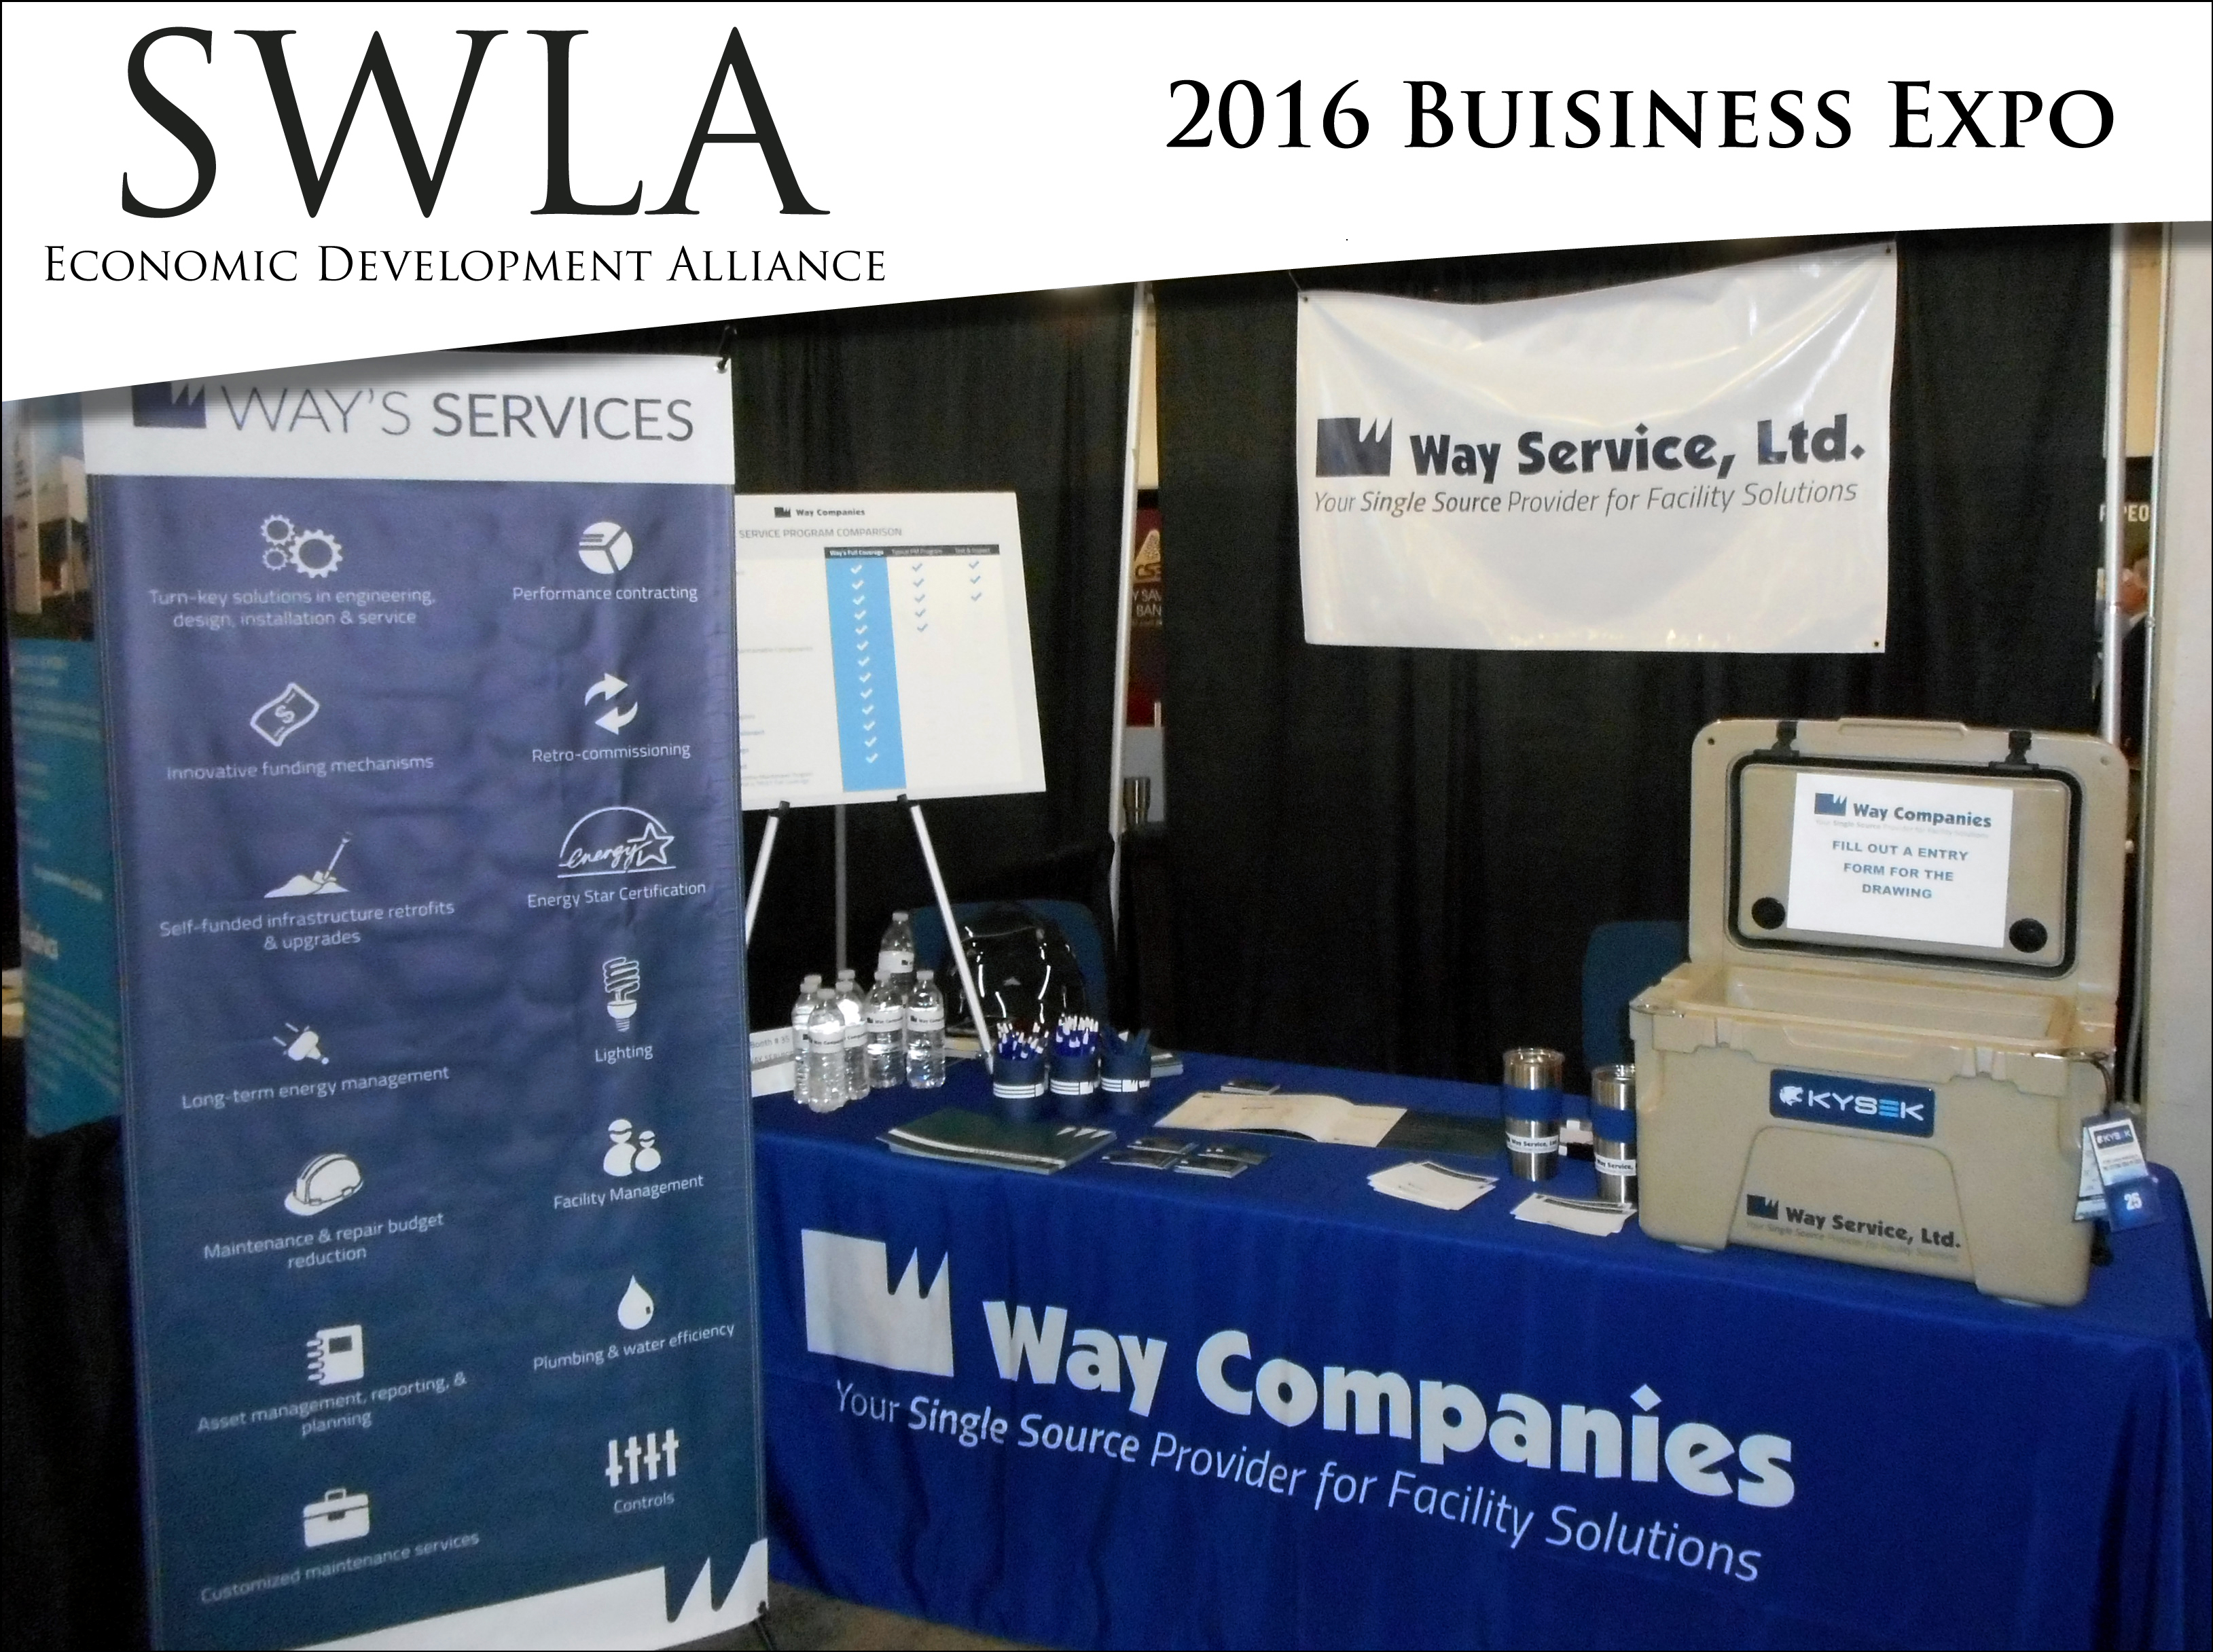 Way Companies' PACE table at SWLA Expo.